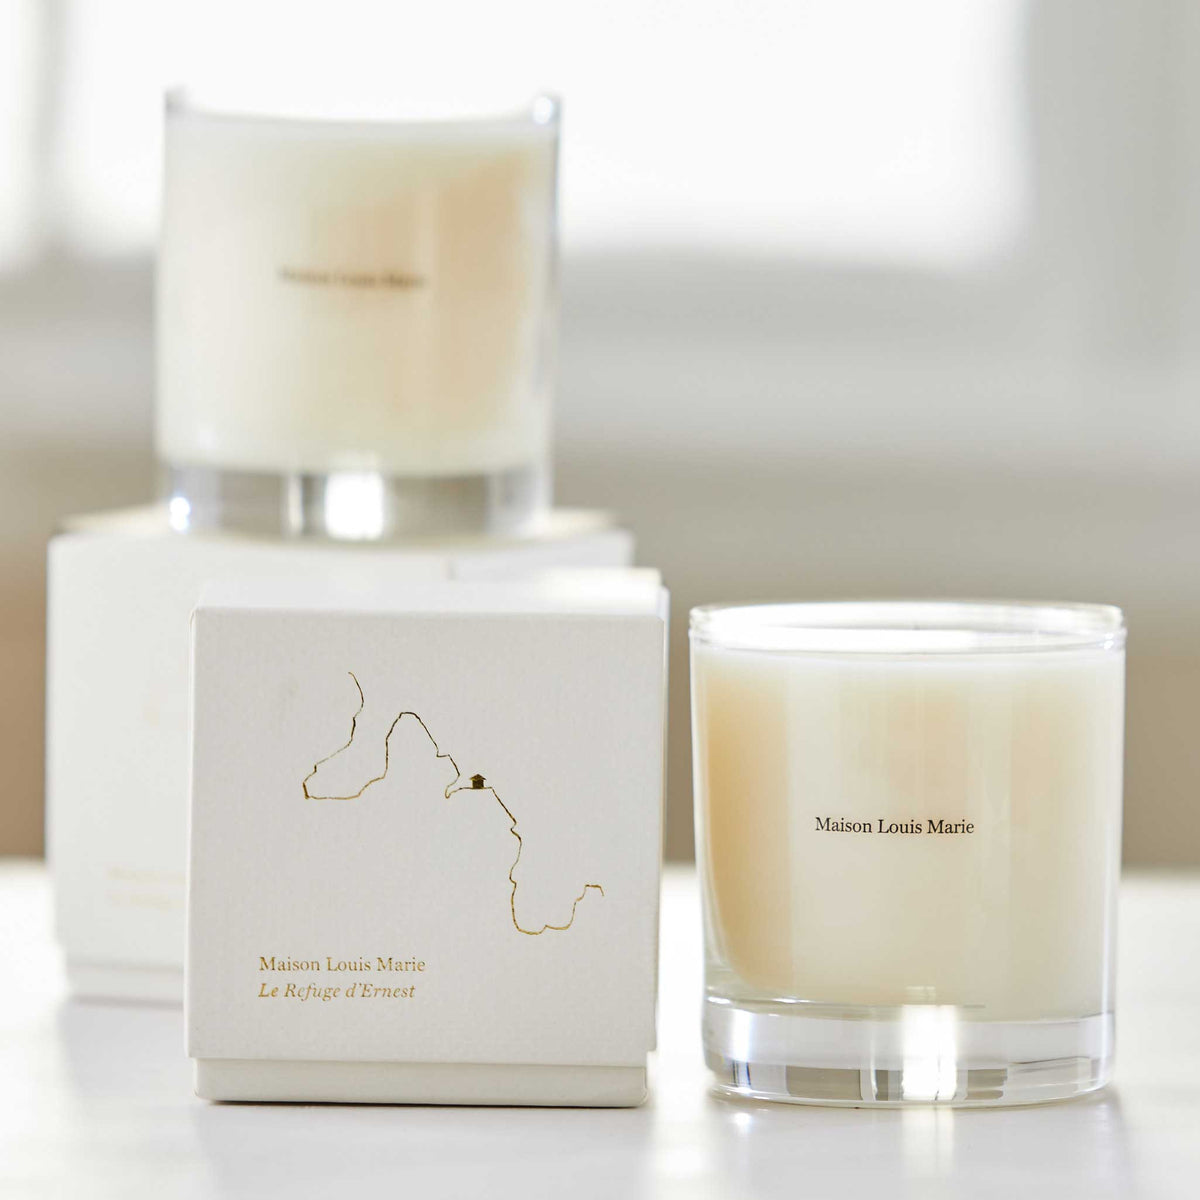 MAISON LOUIS MARIE LIMITED EDITION CANDLE